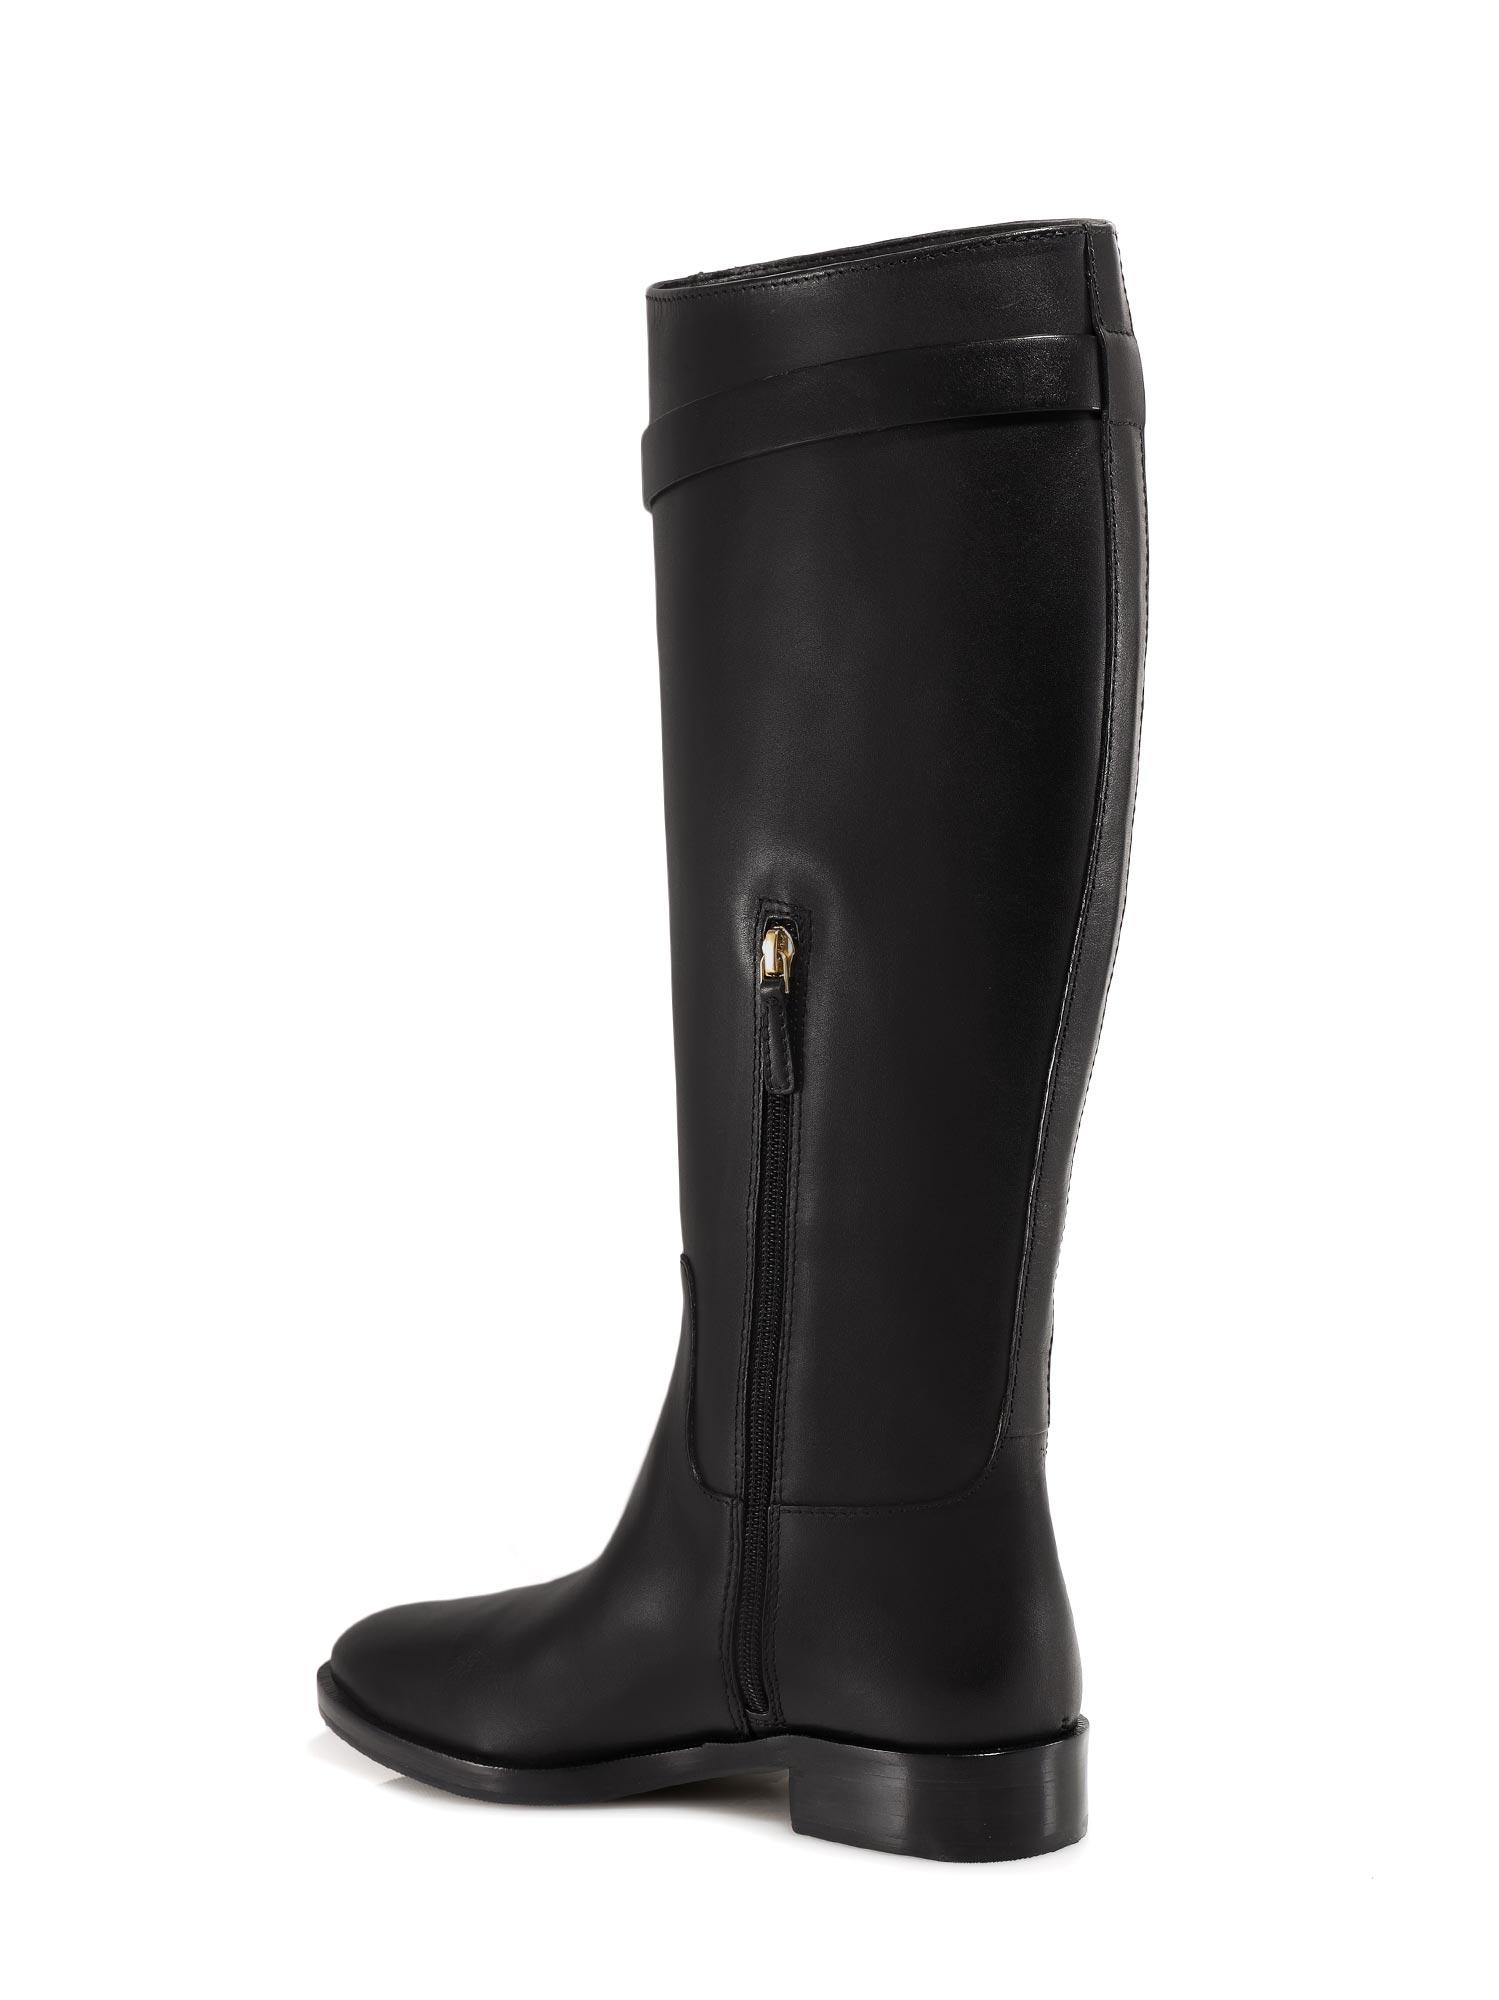 Tory Burch Leather T-hardware Riding Boots in Black | Lyst